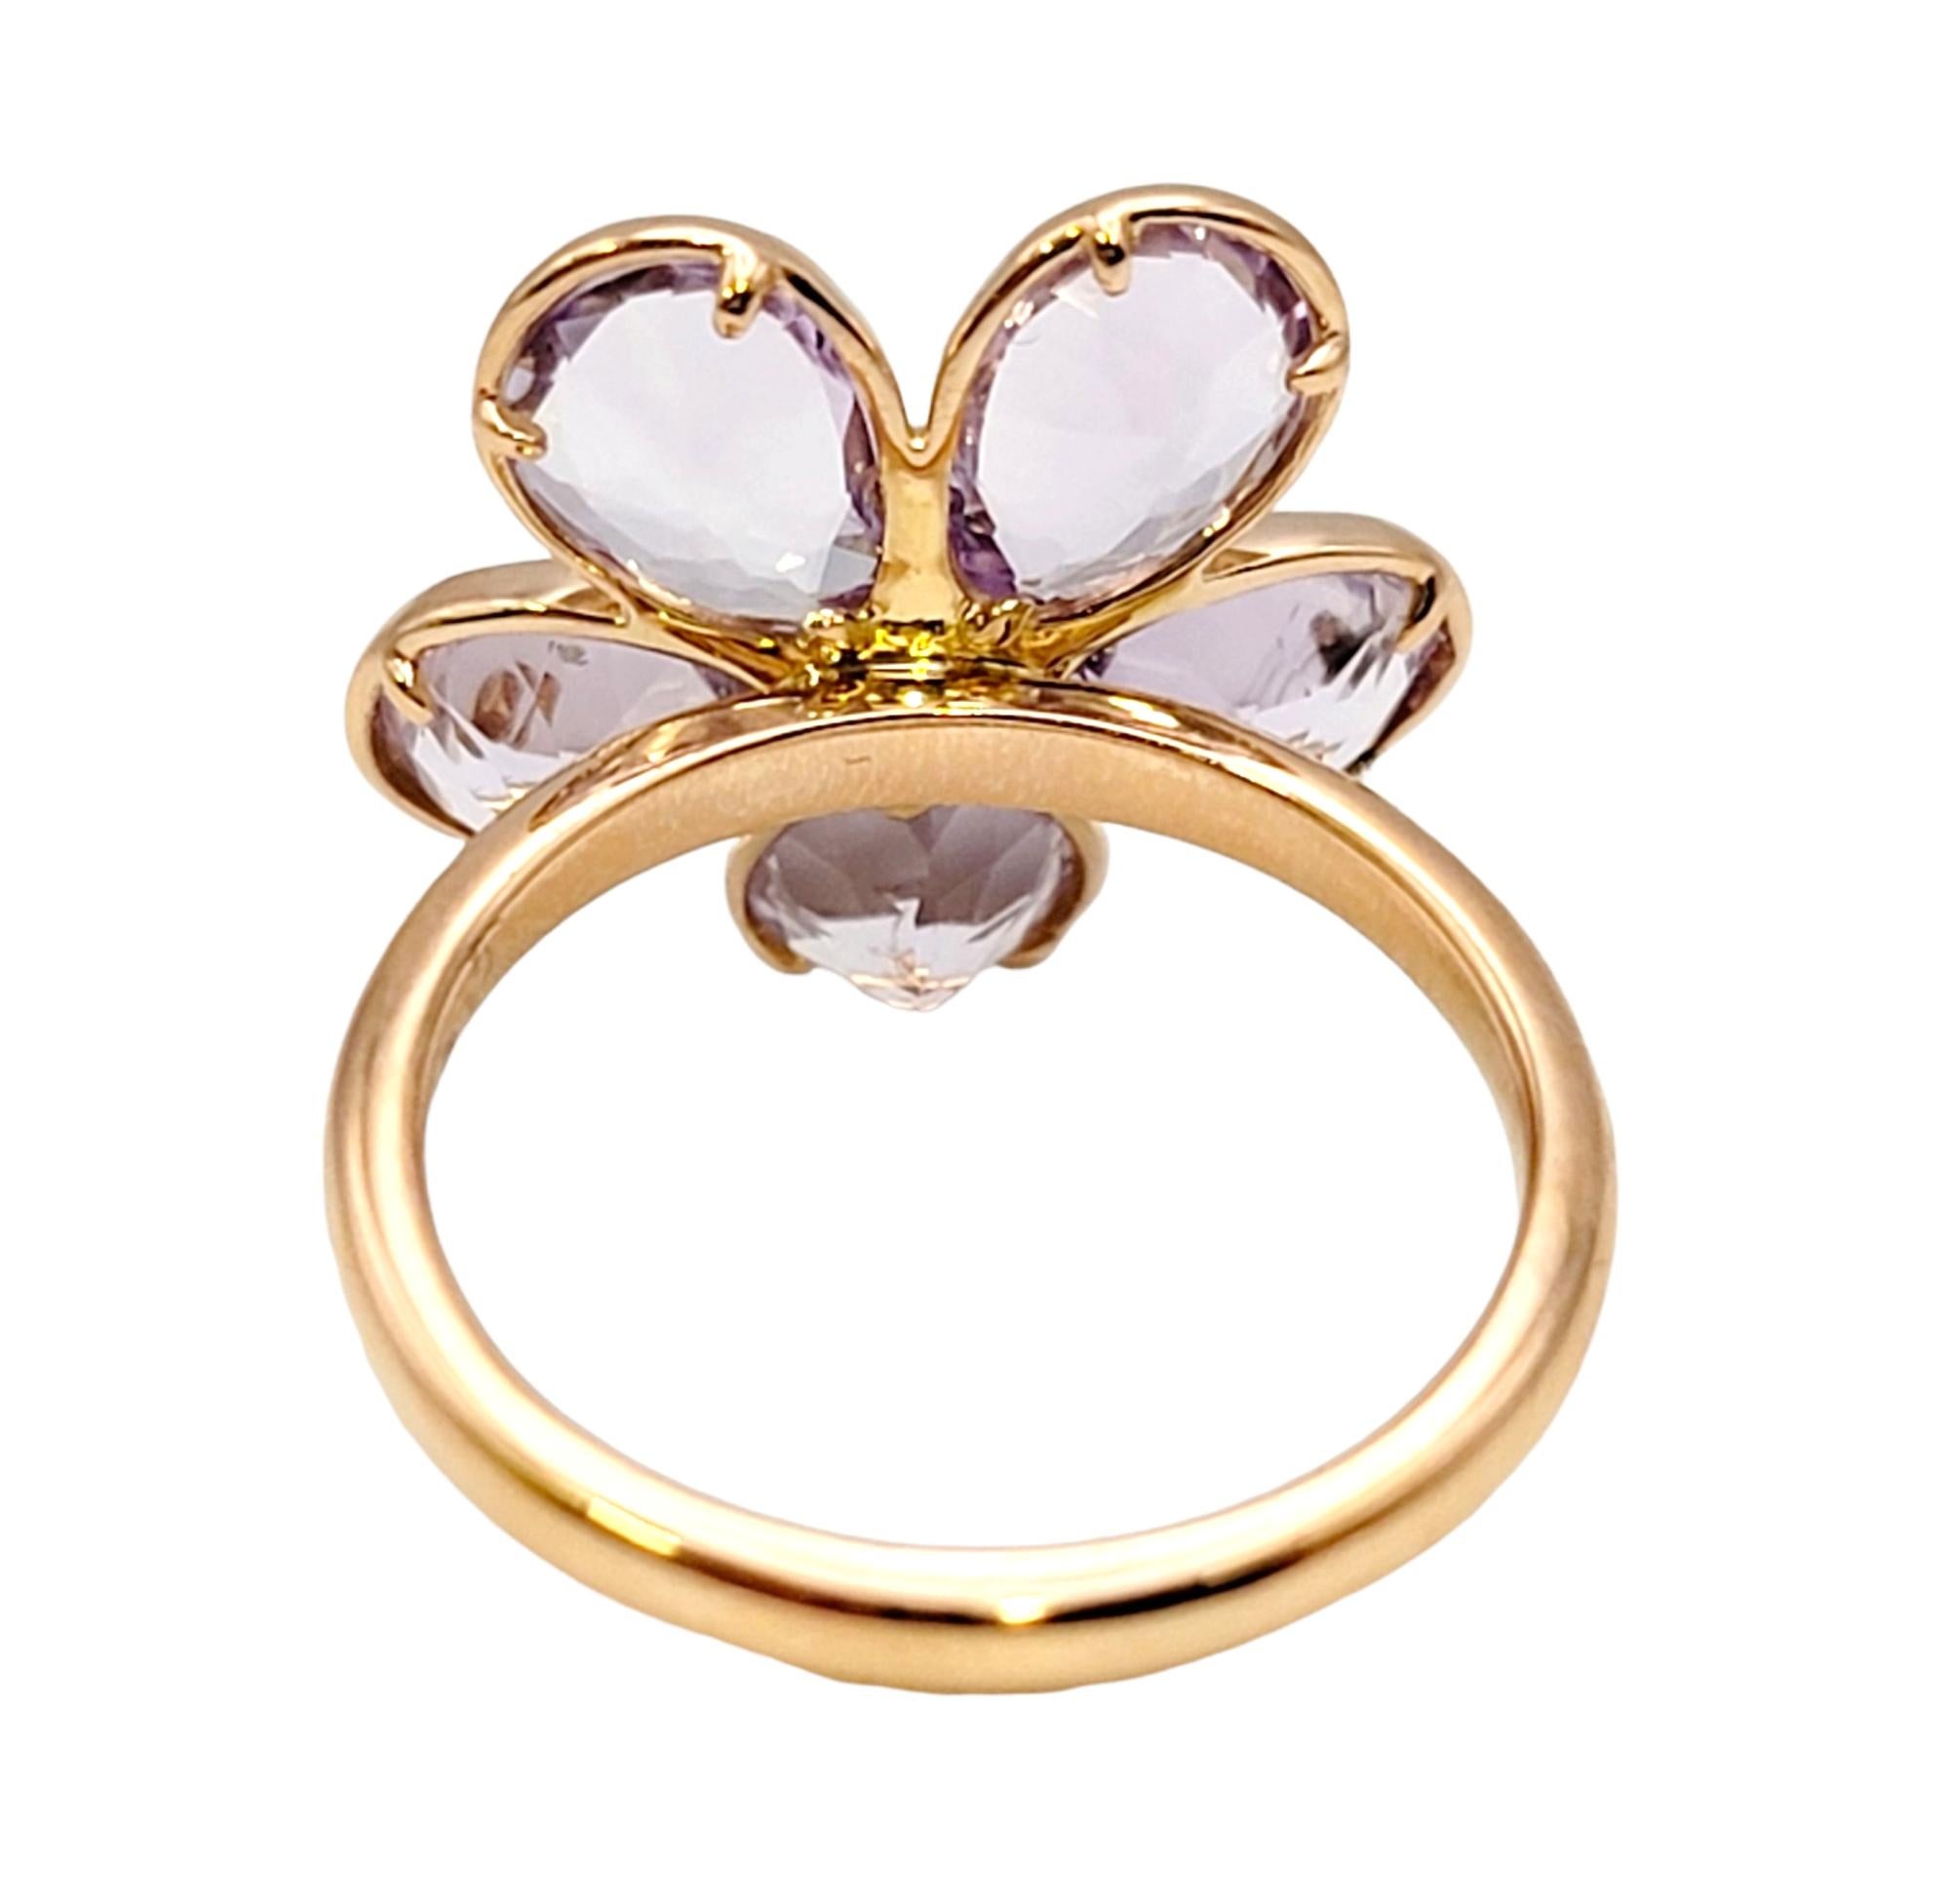 Pear Cut Tiffany & Co. Amethyst and Diamond Sparklers Flower Ring in 18 Karat Rose Gold